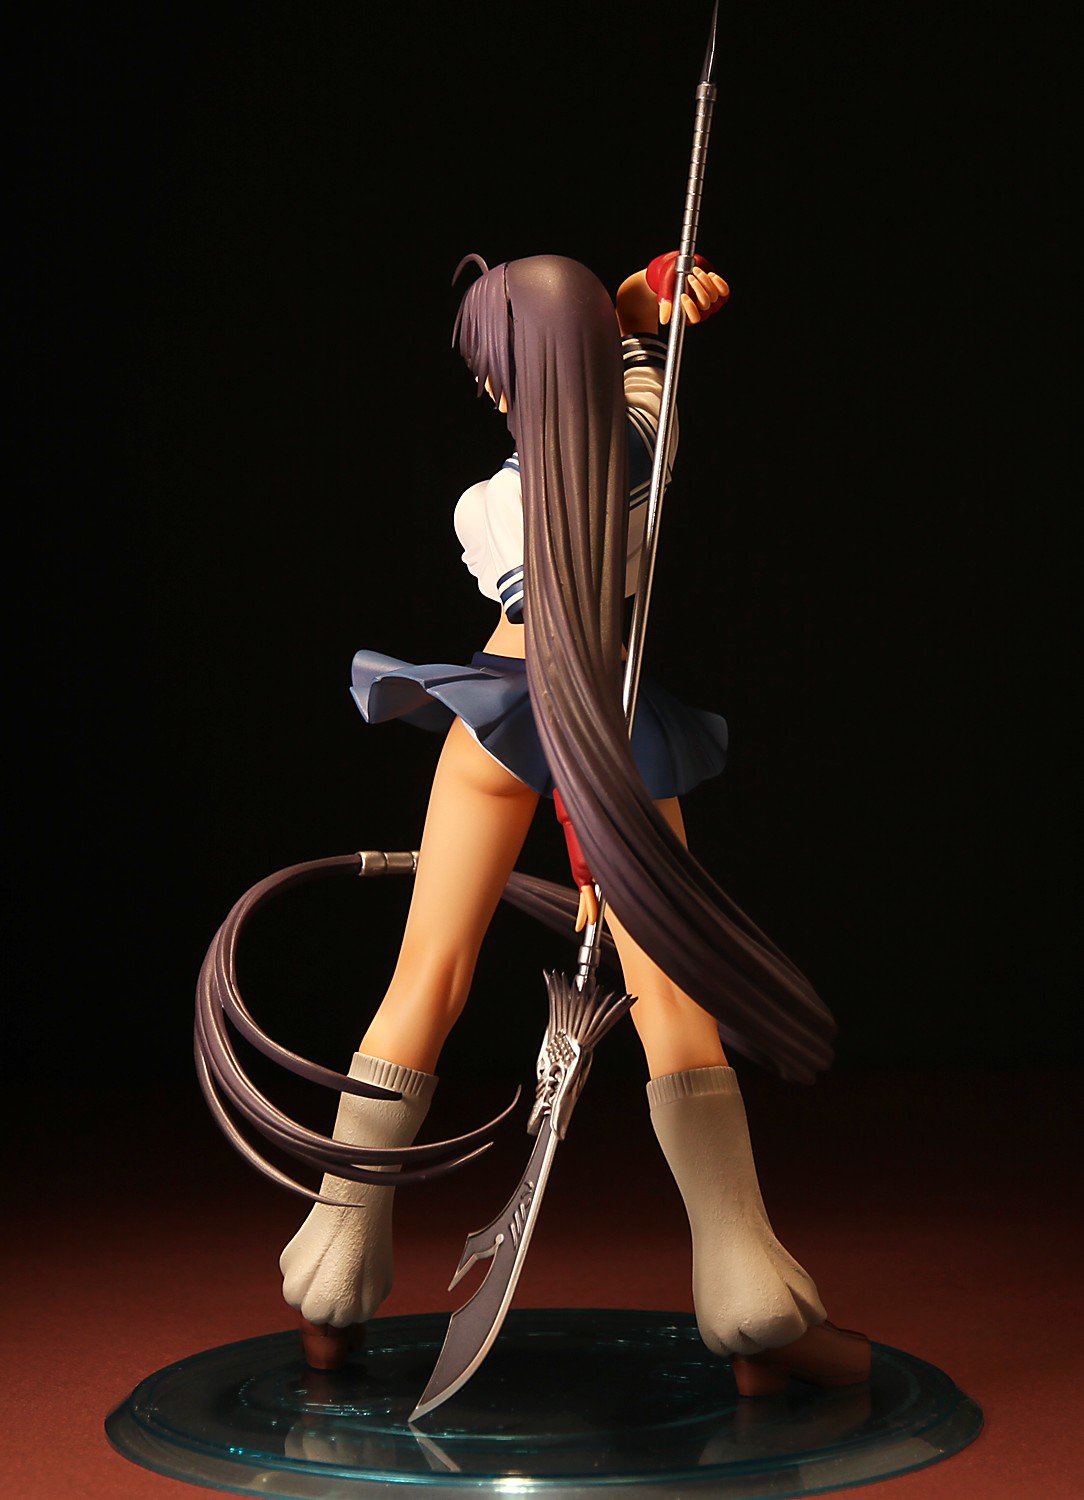 I remember thinking this was one of the best Kanu Unchou figures I’d ever s...